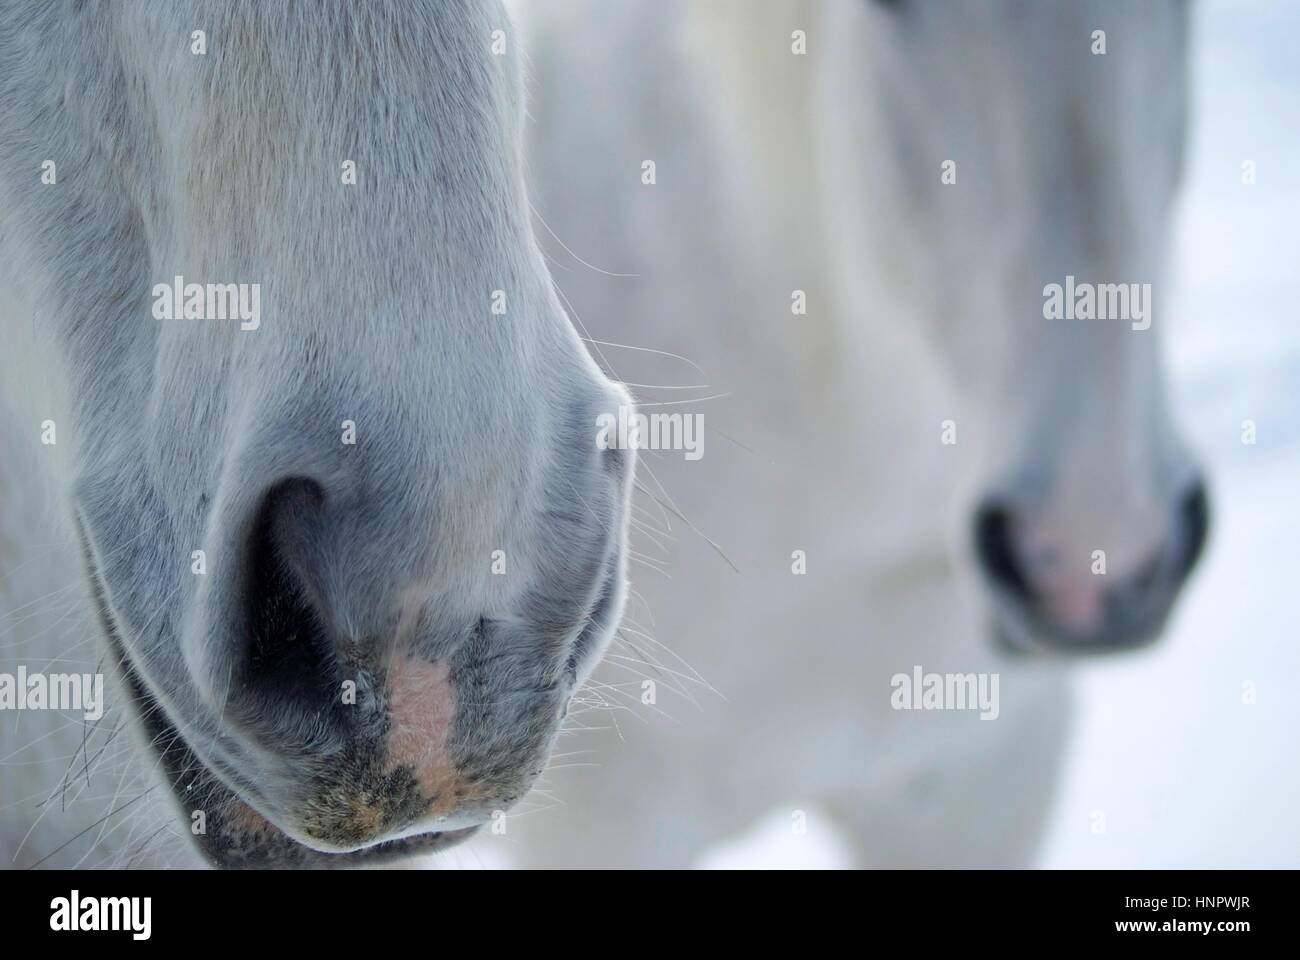 Two horses noses in close up on a winter day Stock Photo